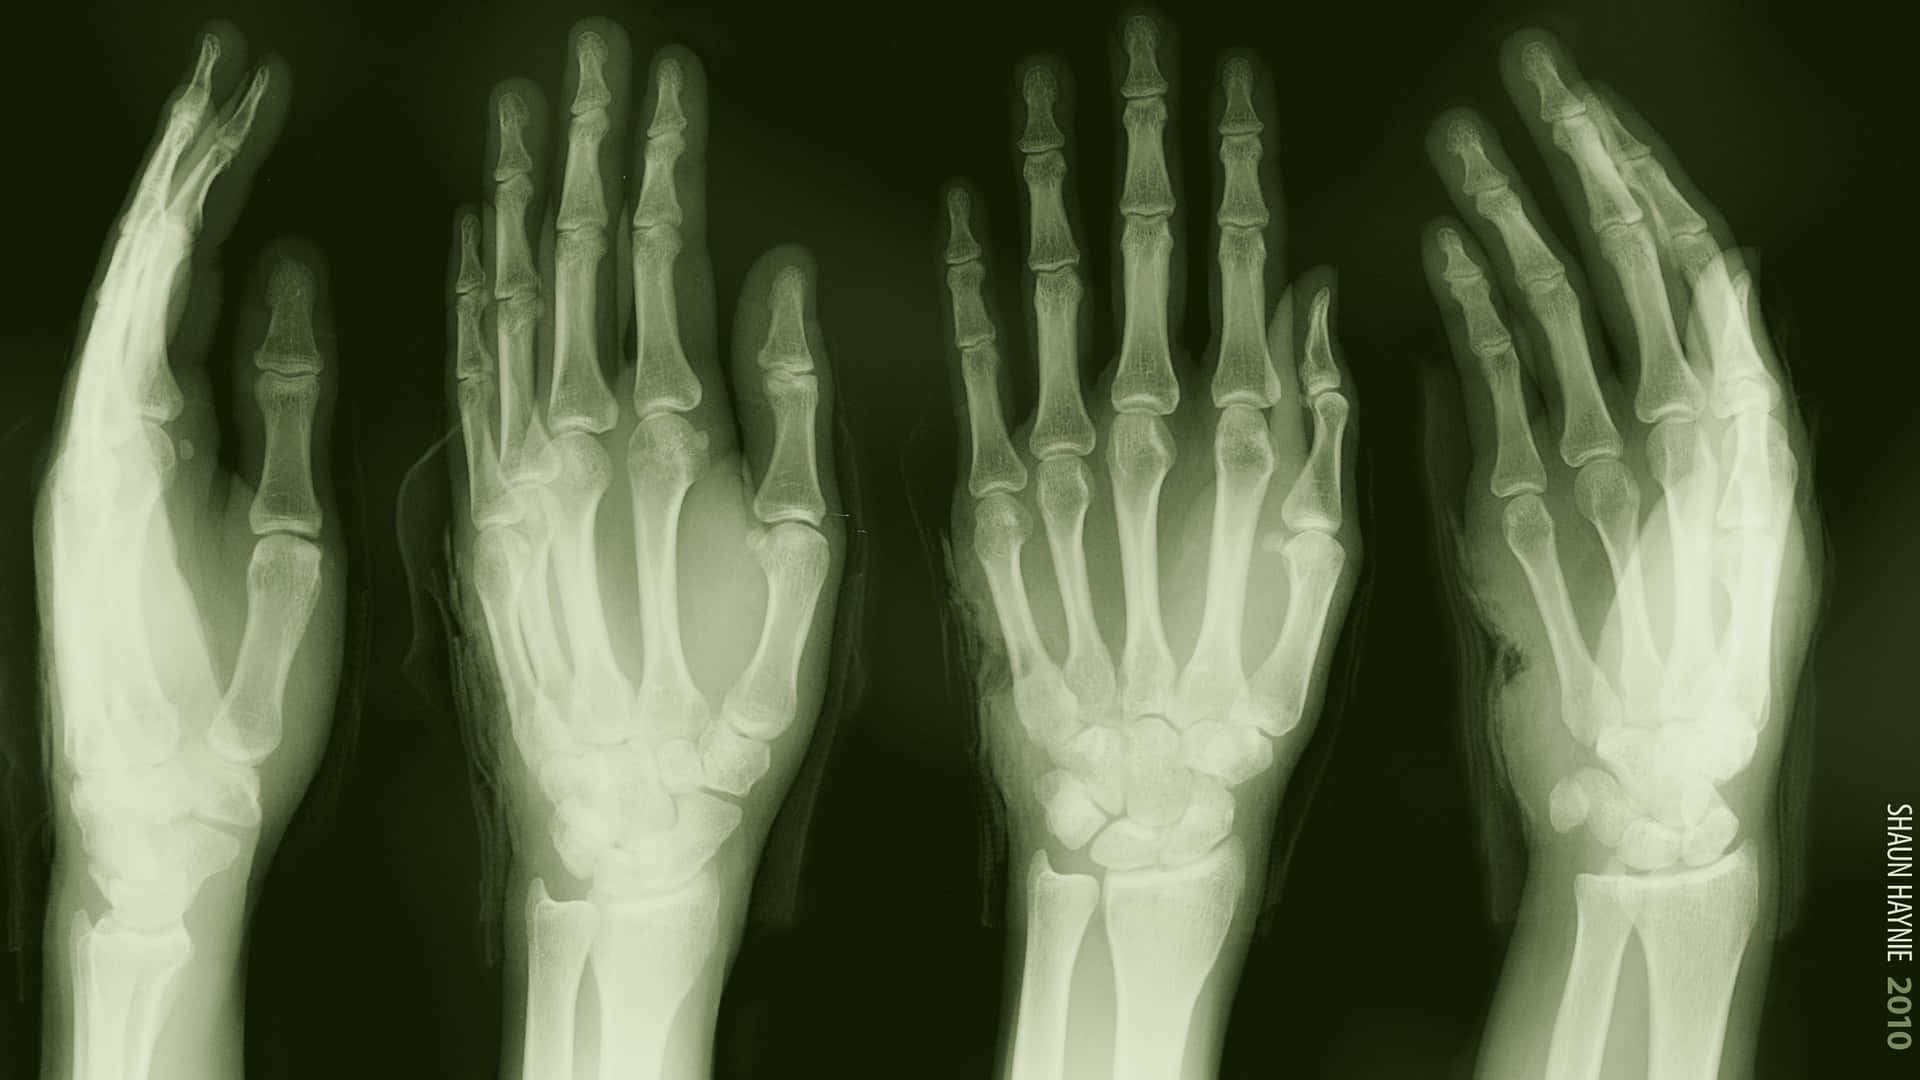 X-rays Of The Hands Of Two People Wallpaper